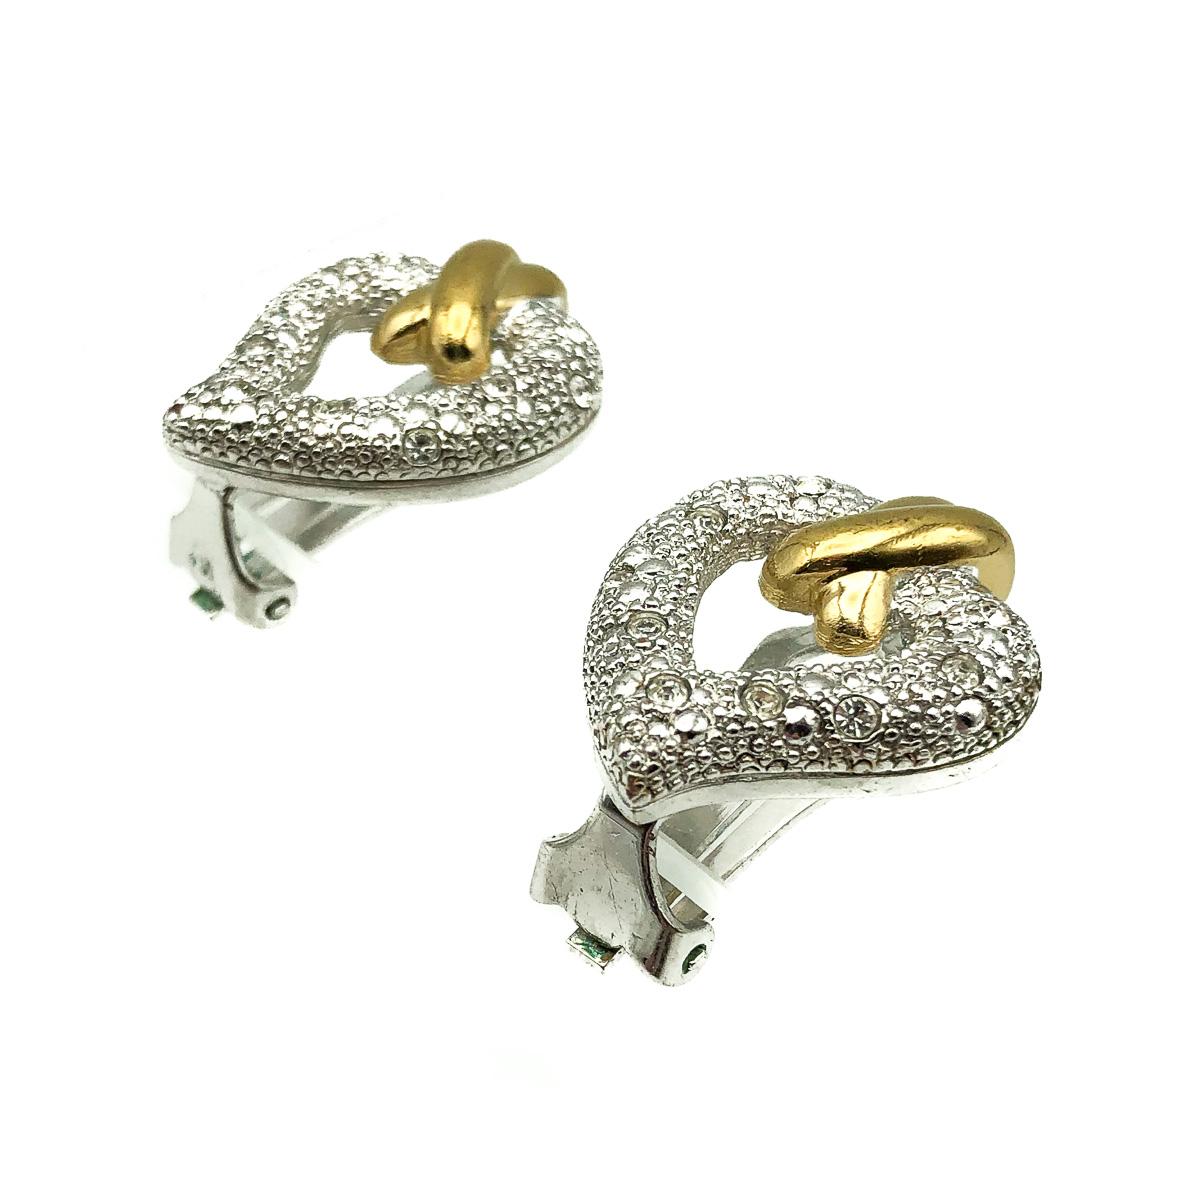 Adorable vintage Grossé earrings. Featuring a Stylised heart in silver pave set with crystals and finished with a gold kiss atop the heart. 
About Grossé: Henkel & Grossé are world class producers of costume jewellery. As esteemed German jewellers